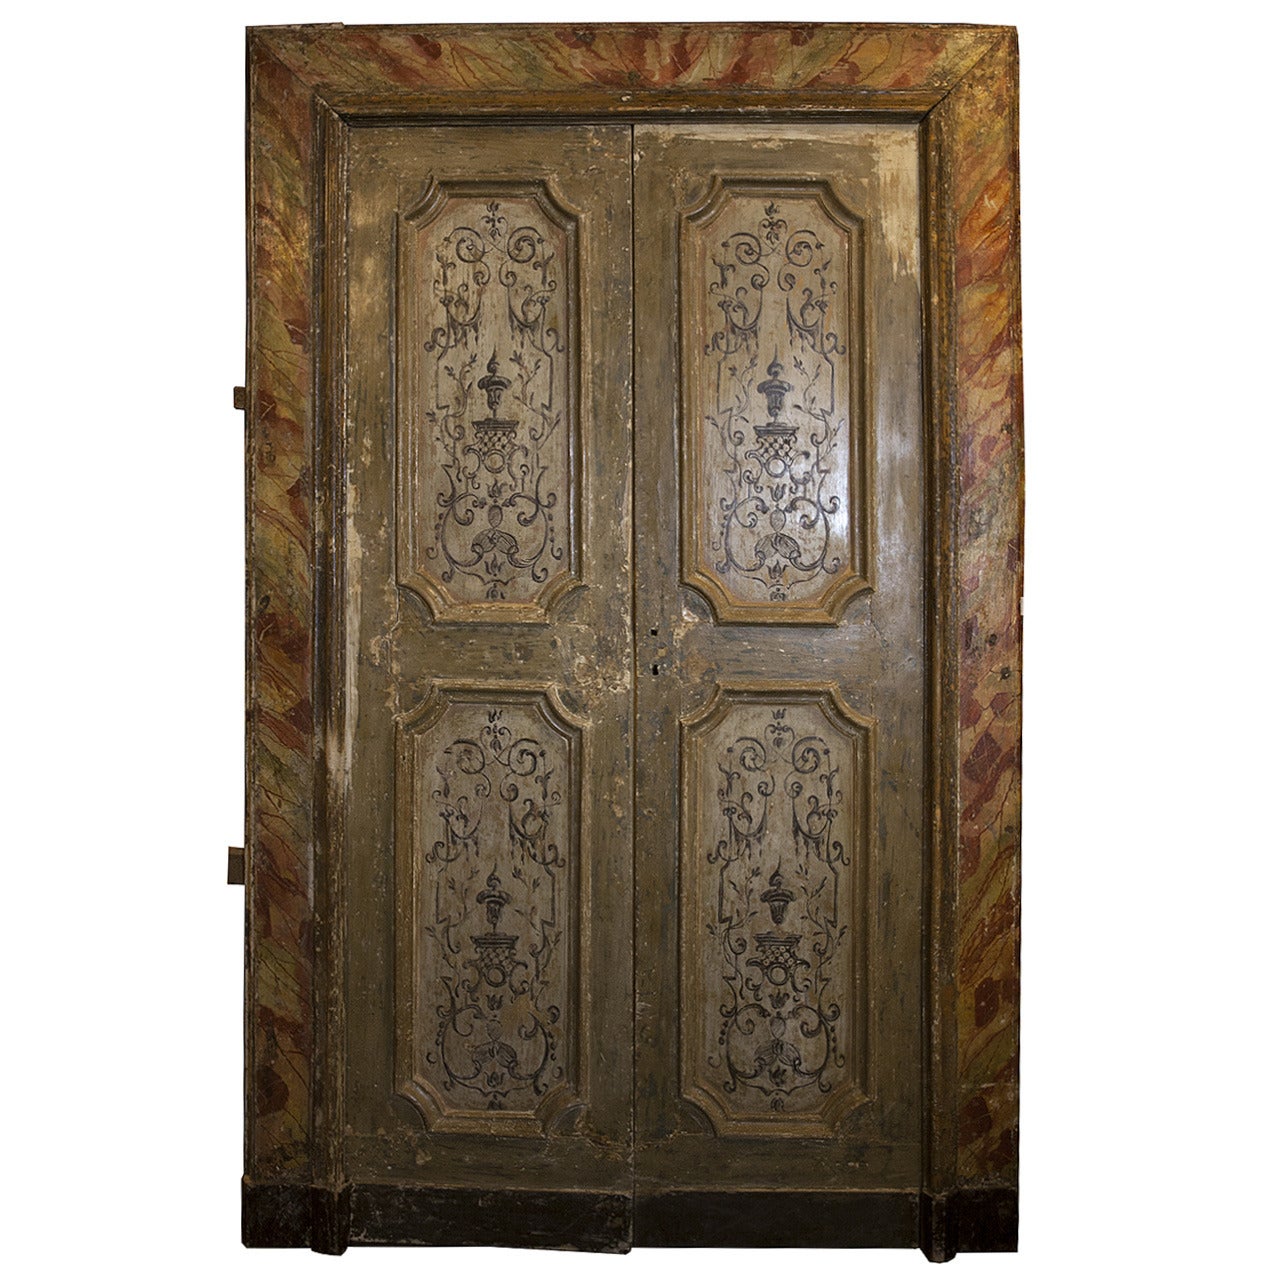 Antique Lacquered Door Complete with its Original Frame